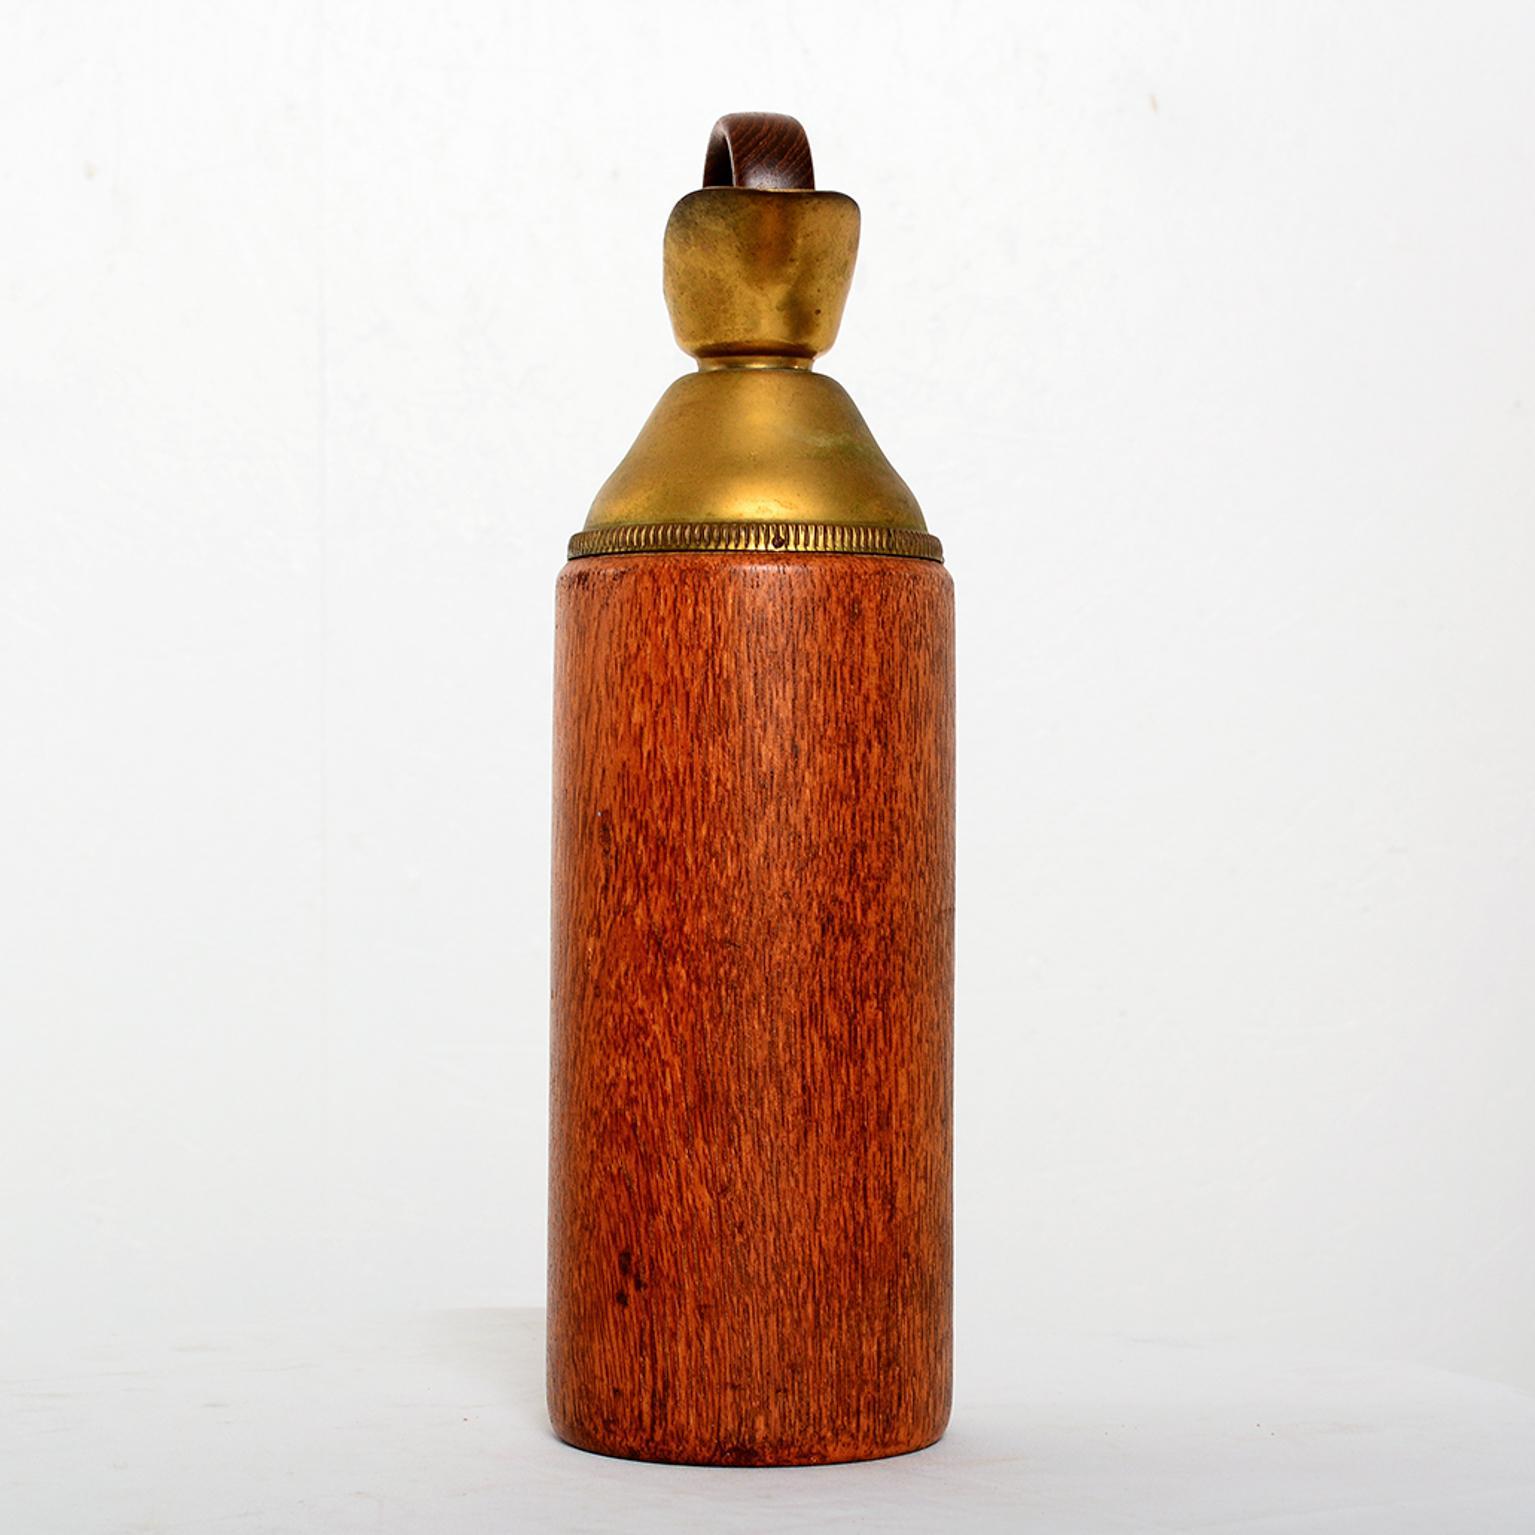 Pitcher
Italian Vintage pitcher thermos by Aldo Tura. Brass and teakwood.  
Unmarked.
Italy circa the 1950s.
Dimensions: 6